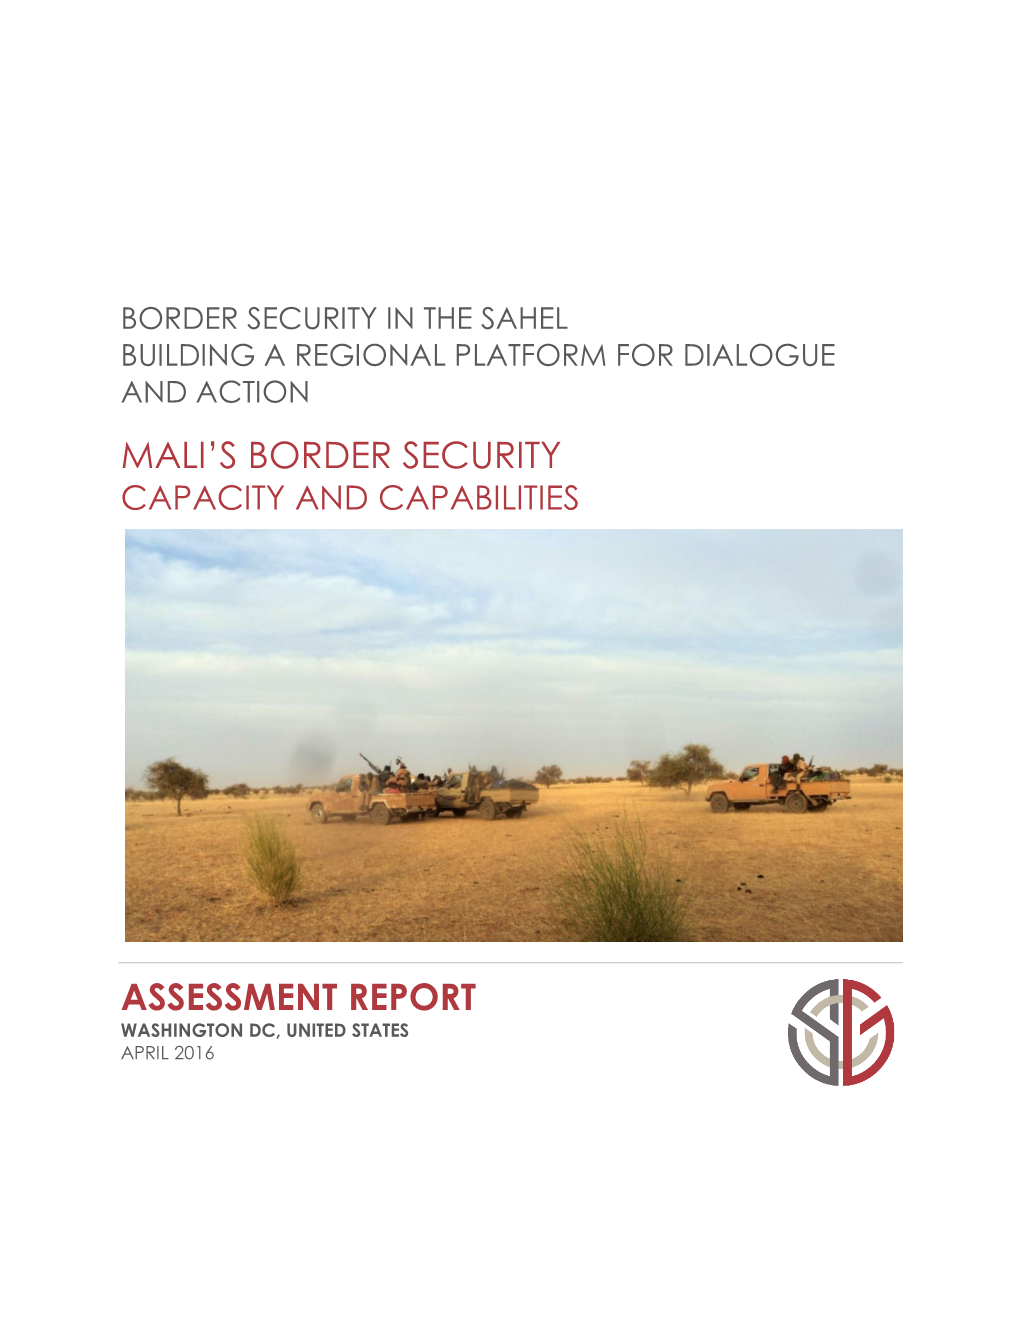 Mali's Border Security Assessment Report